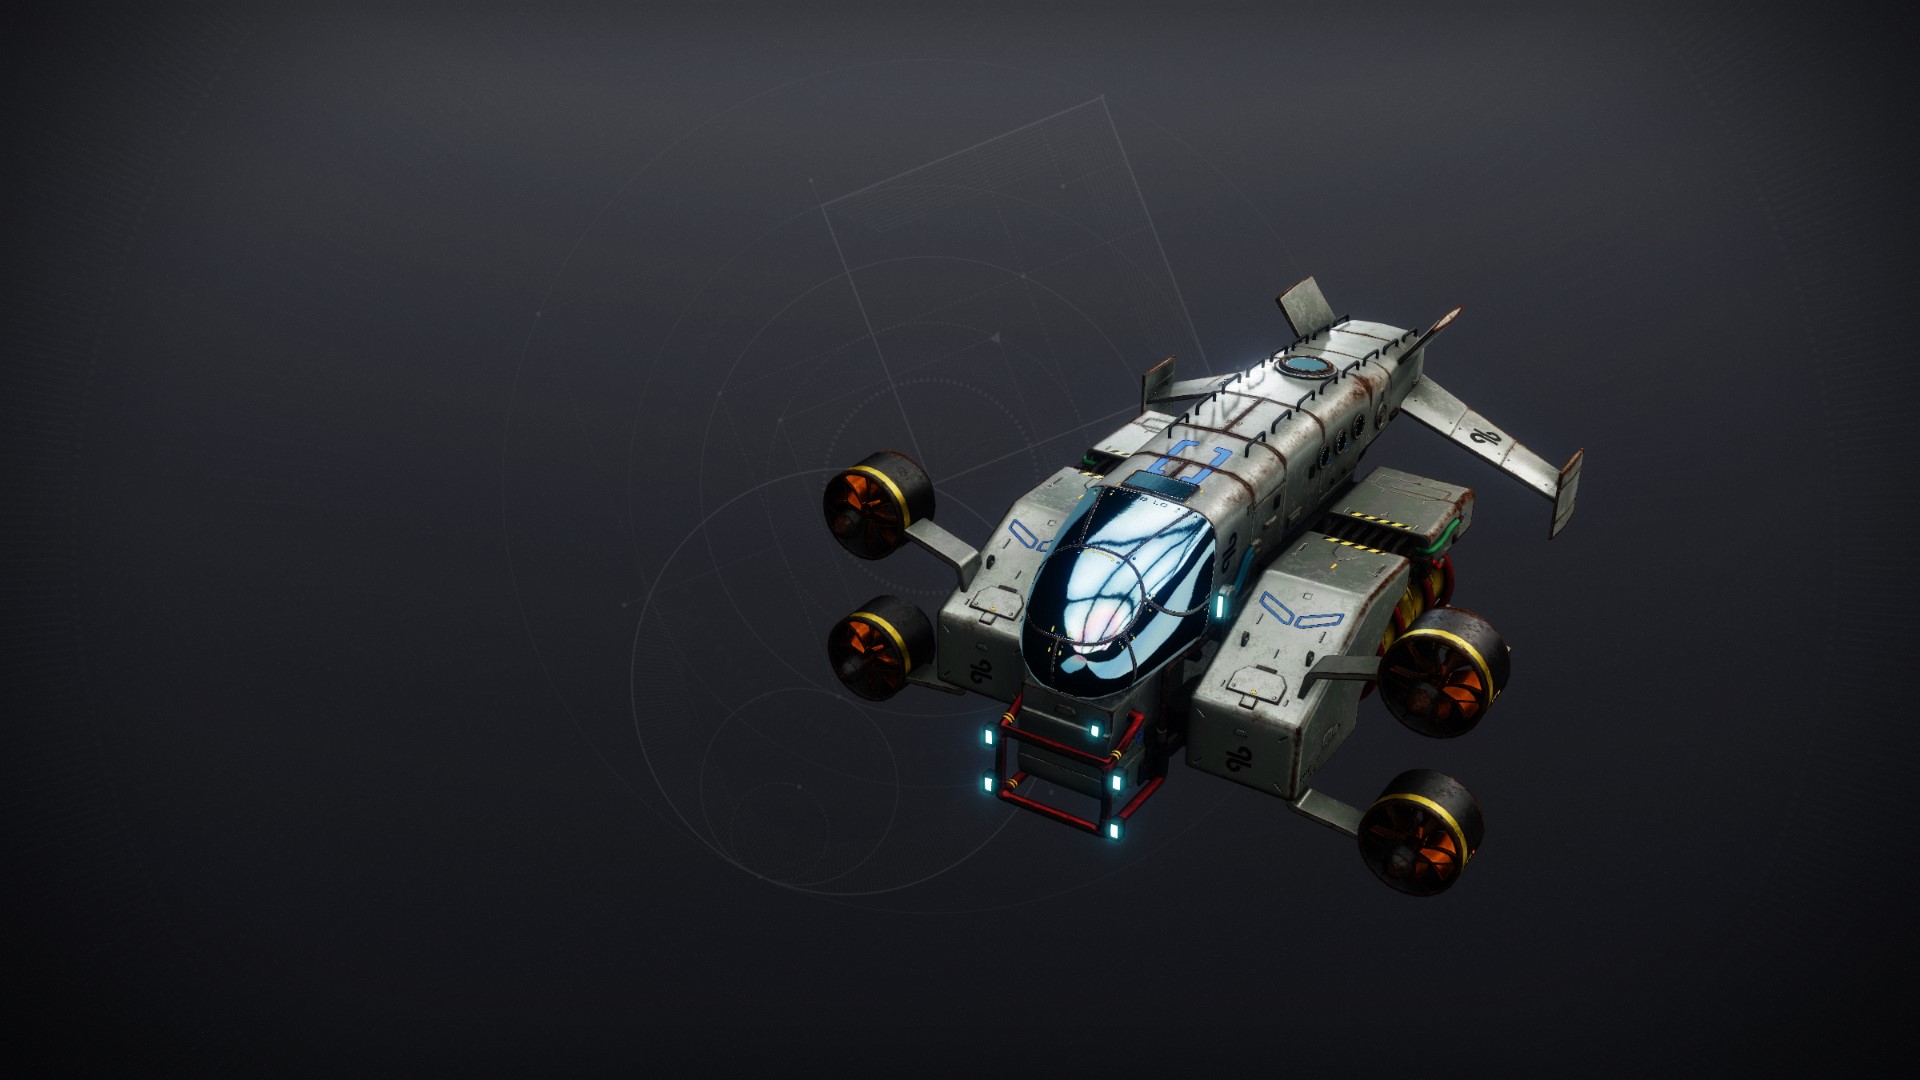 An in-game render of the Prototype Submersible.